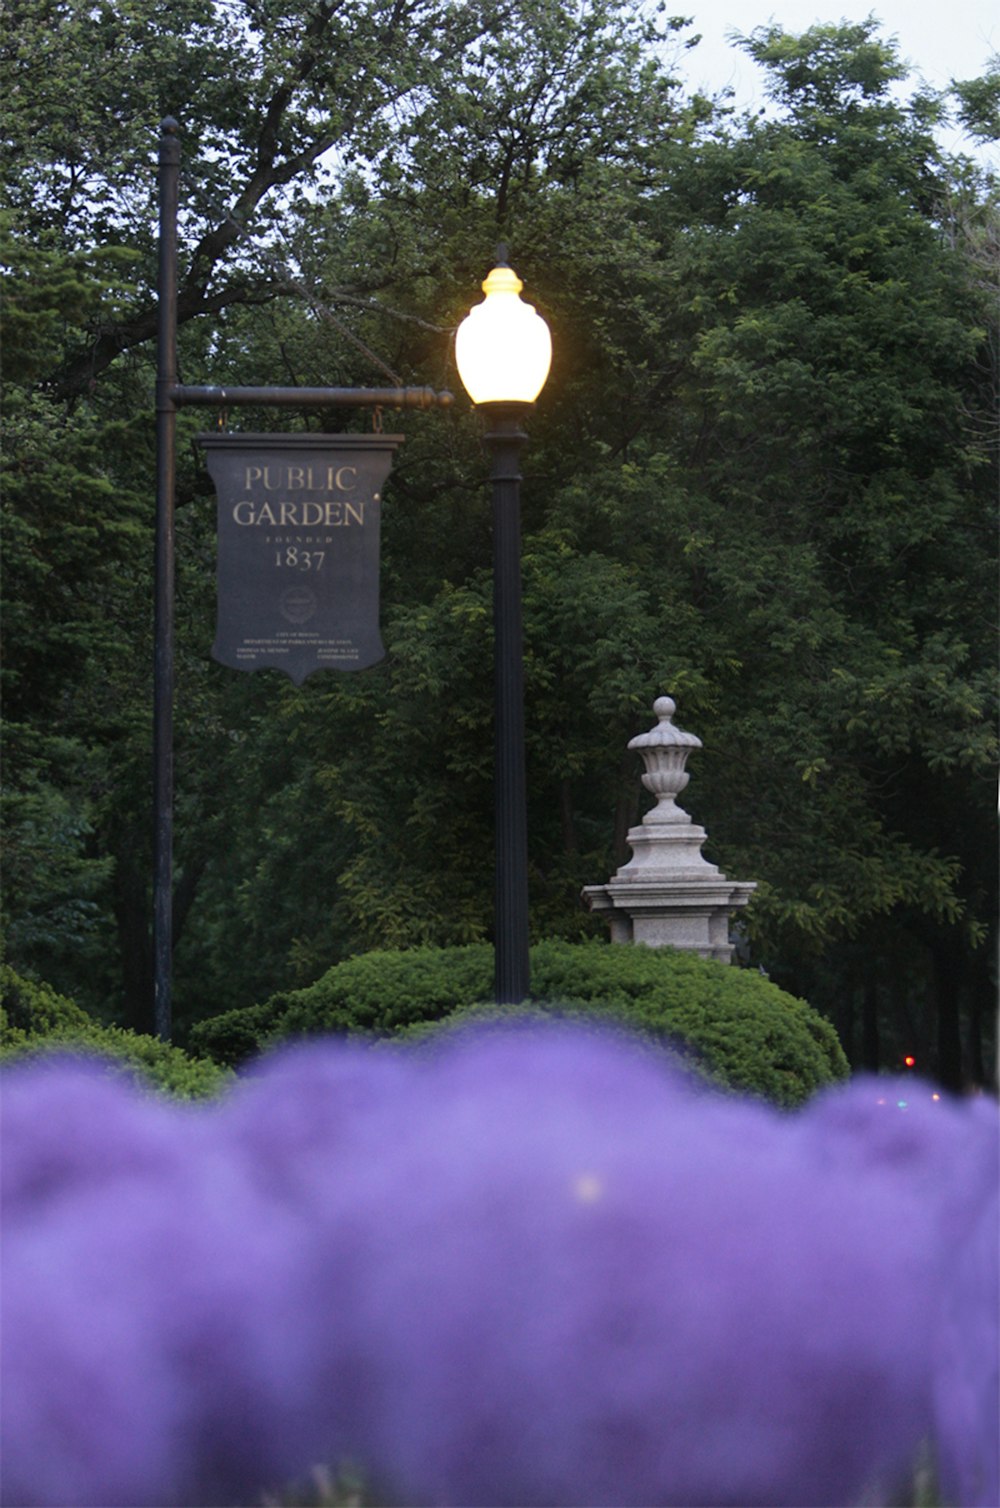 a lamp post in a park with purple flowers in the foreground